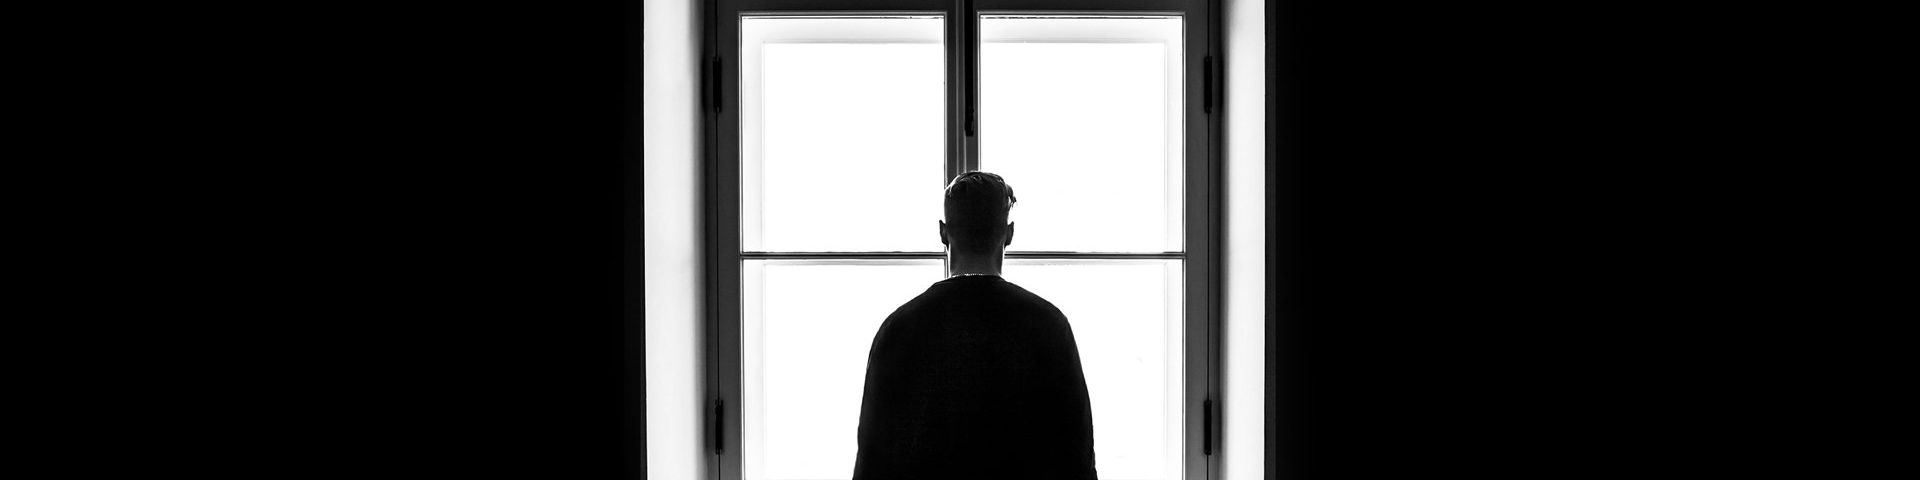 A black and white photograph of a back of a man, silhouetted, stood in front of at the bright white light of window. On either side, the walls are black. 